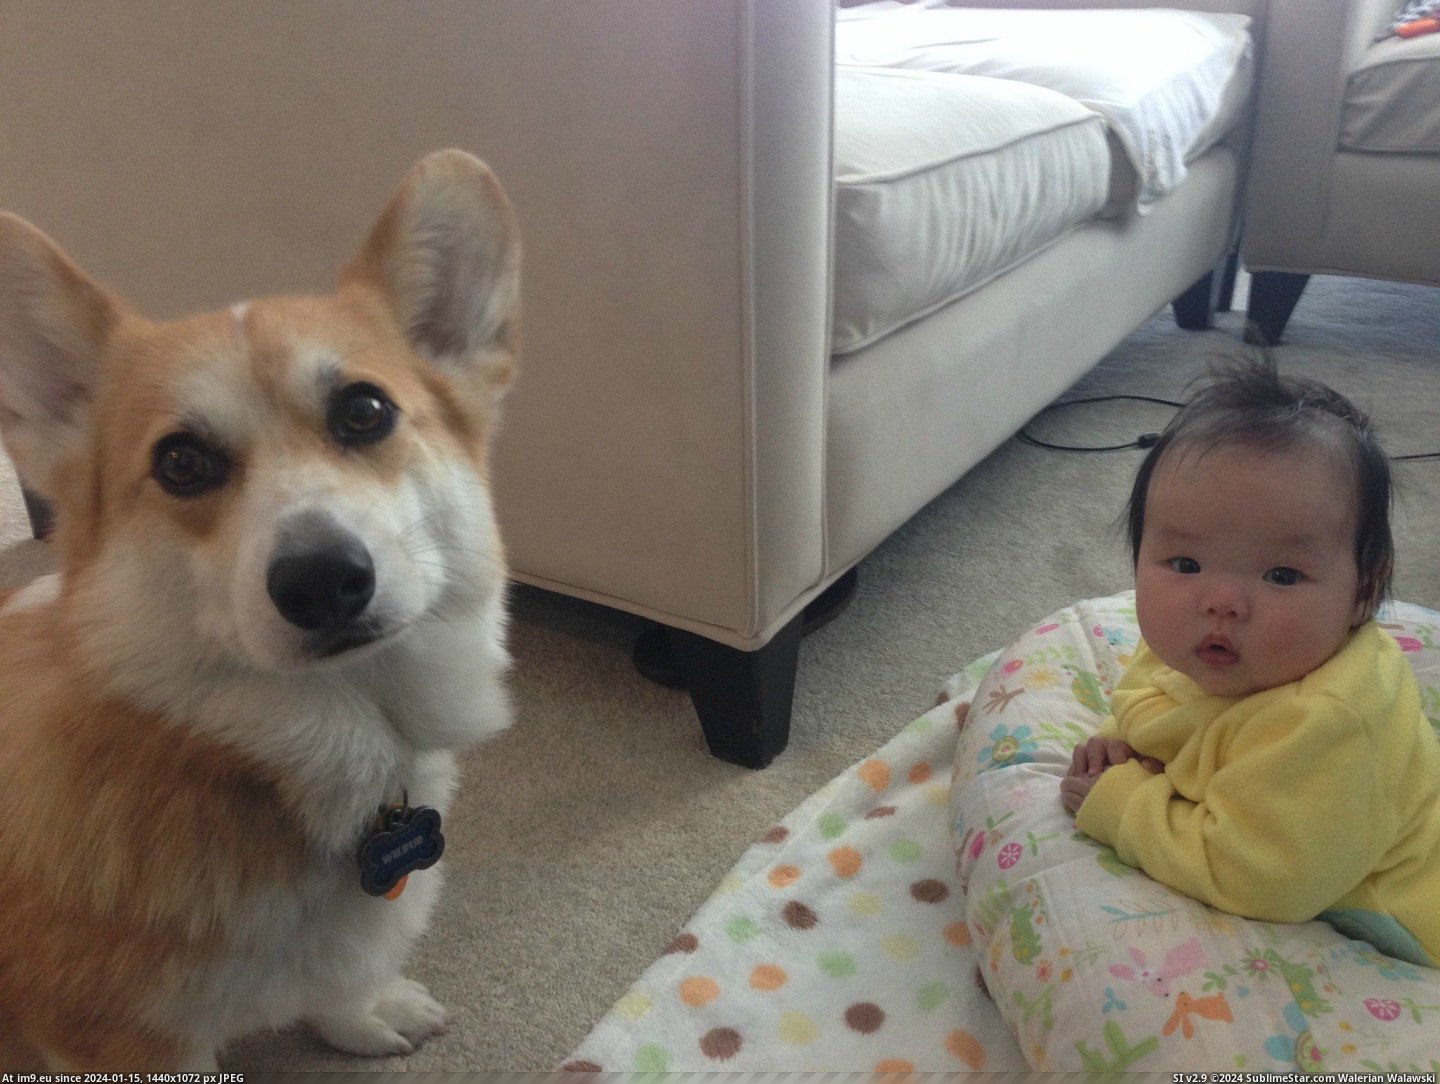 #Old #Likes #Daughter #Depressed #Counseli #Psychiatrist #Month #Corgi #Lie [Aww] My corgi likes to lie down next to my 4 month old daughter. It looks like he's depressed and she's a psychiatrist counseli Pic. (Obraz z album My r/AWW favs))